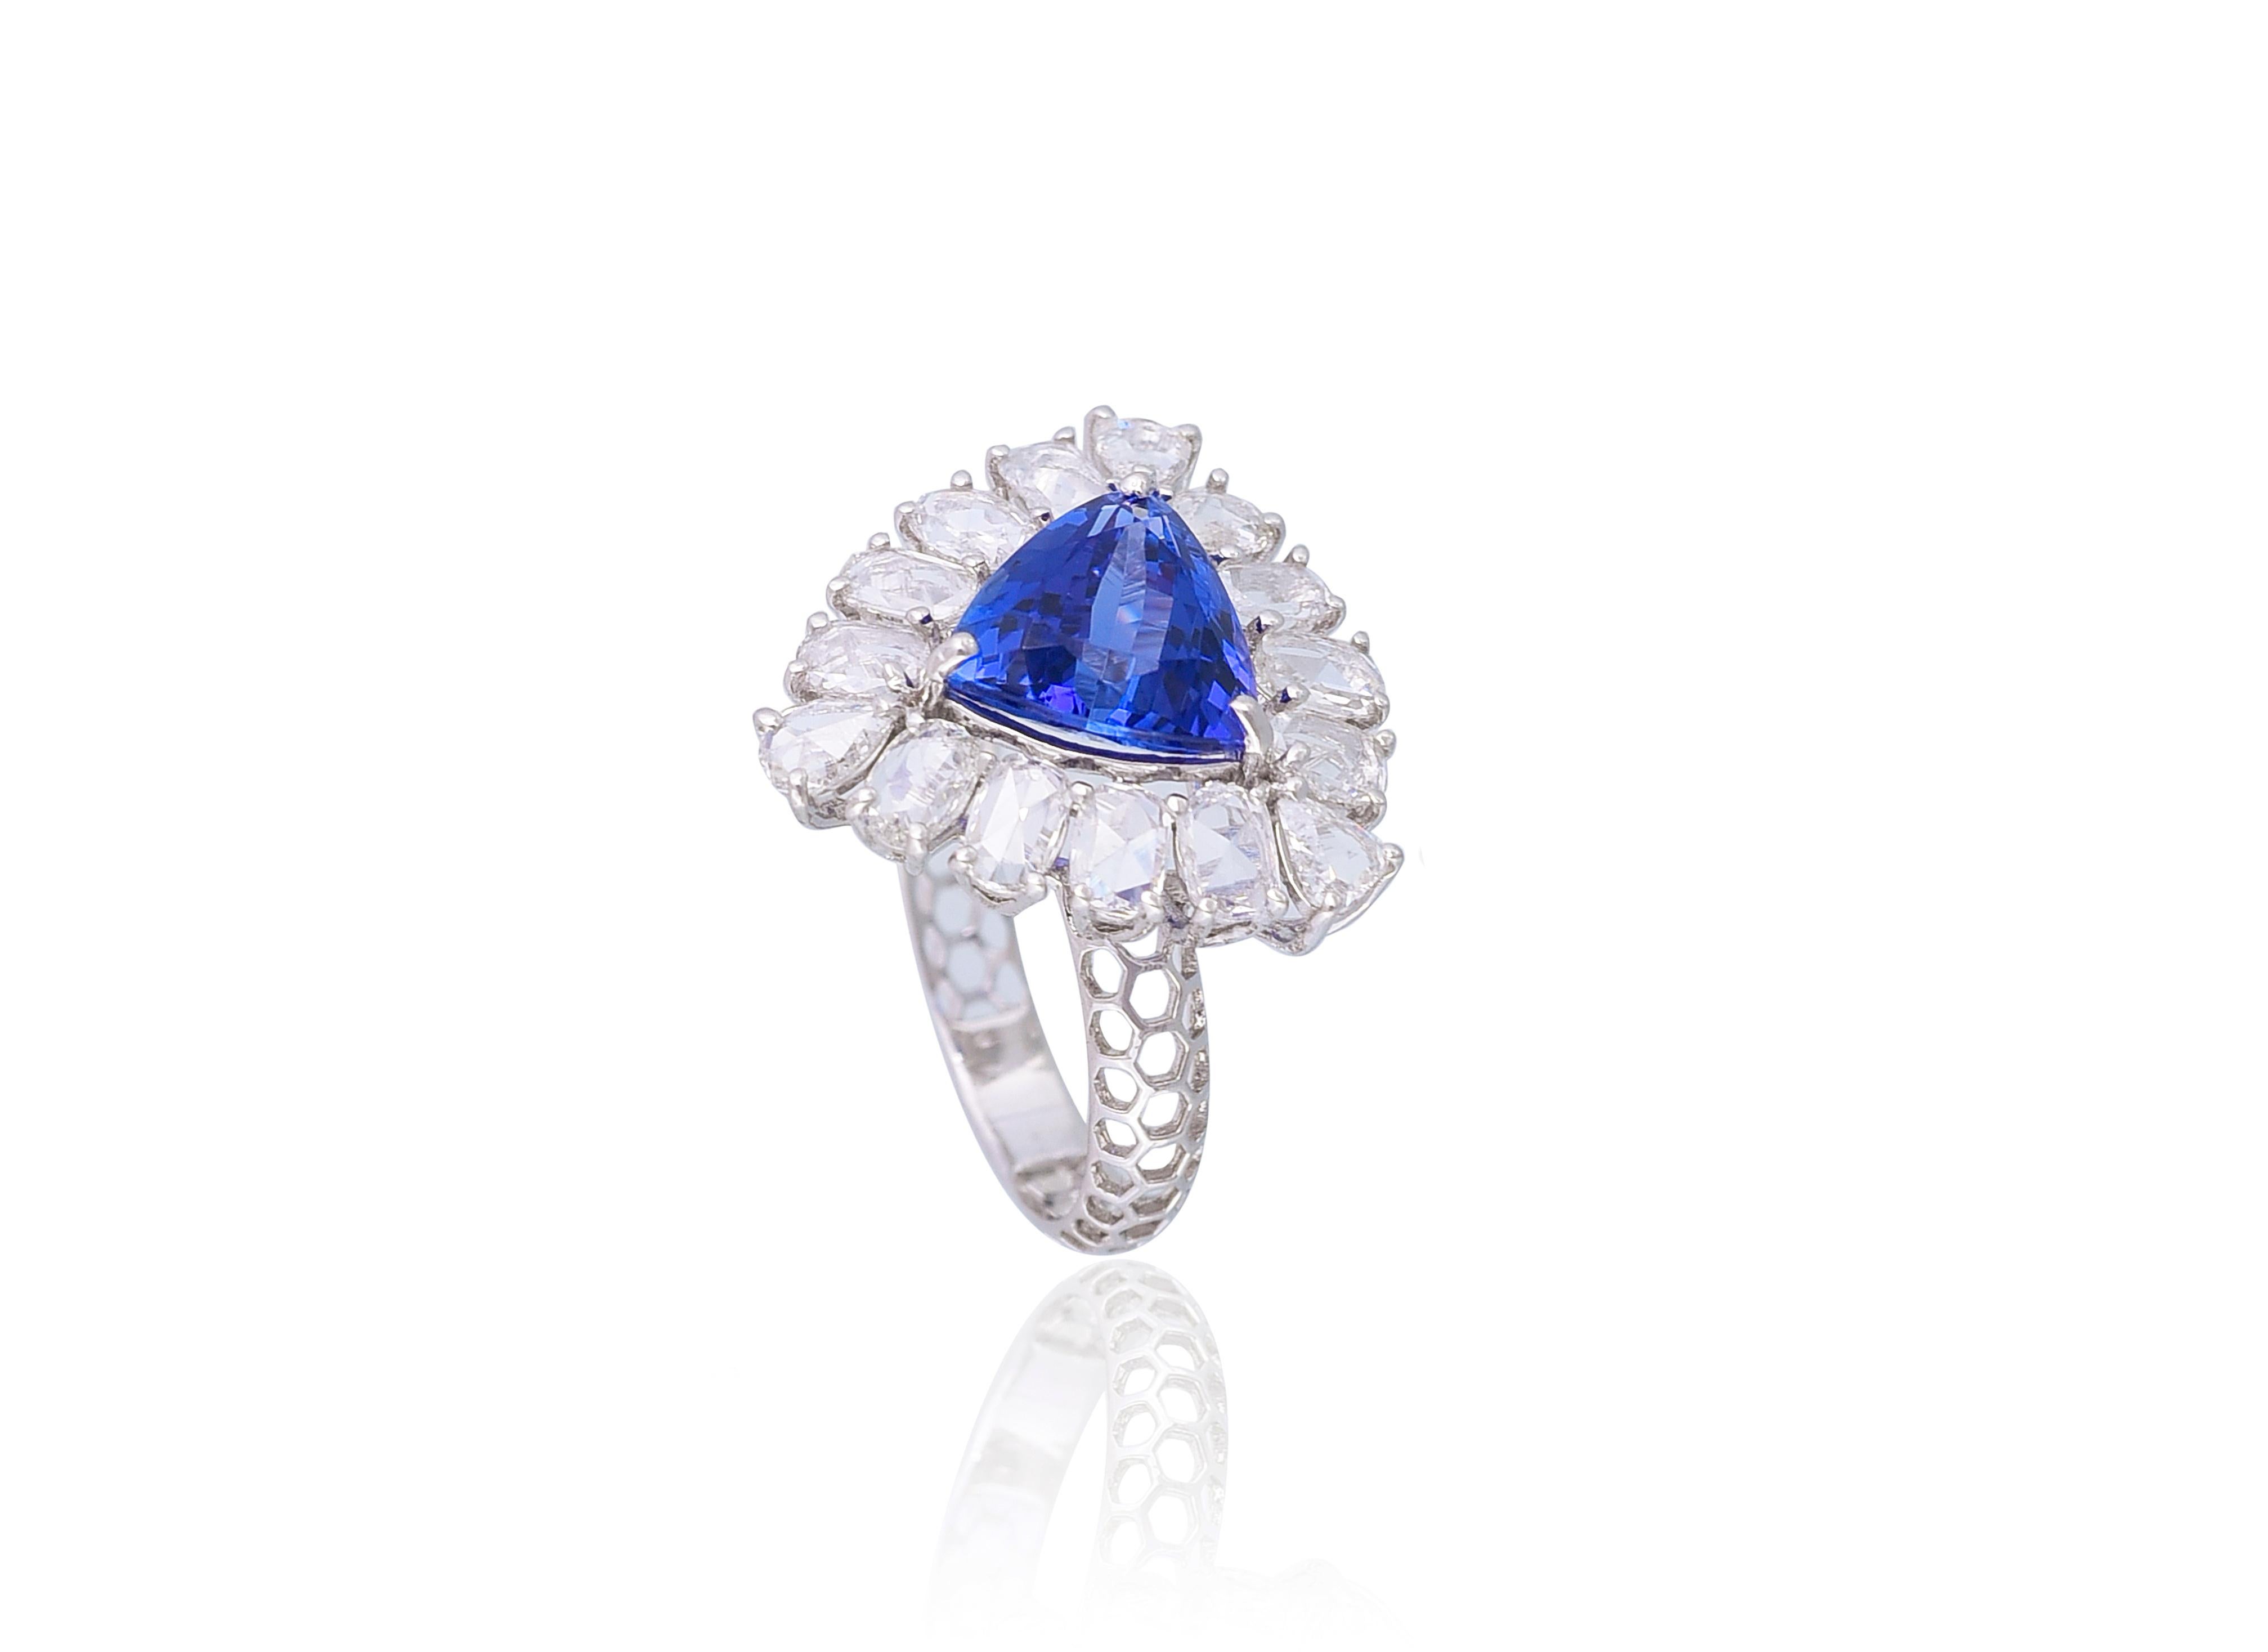 A very gorgeous and wearing Tanzanite and Diamonds Cocktail Ring set in 18K White Gold. The weight of the Tanzanite is 3.92 carats. The gorgeous Tanzanite has a Trillion Shape, is eye clean, is completely natural without any treatment and originates